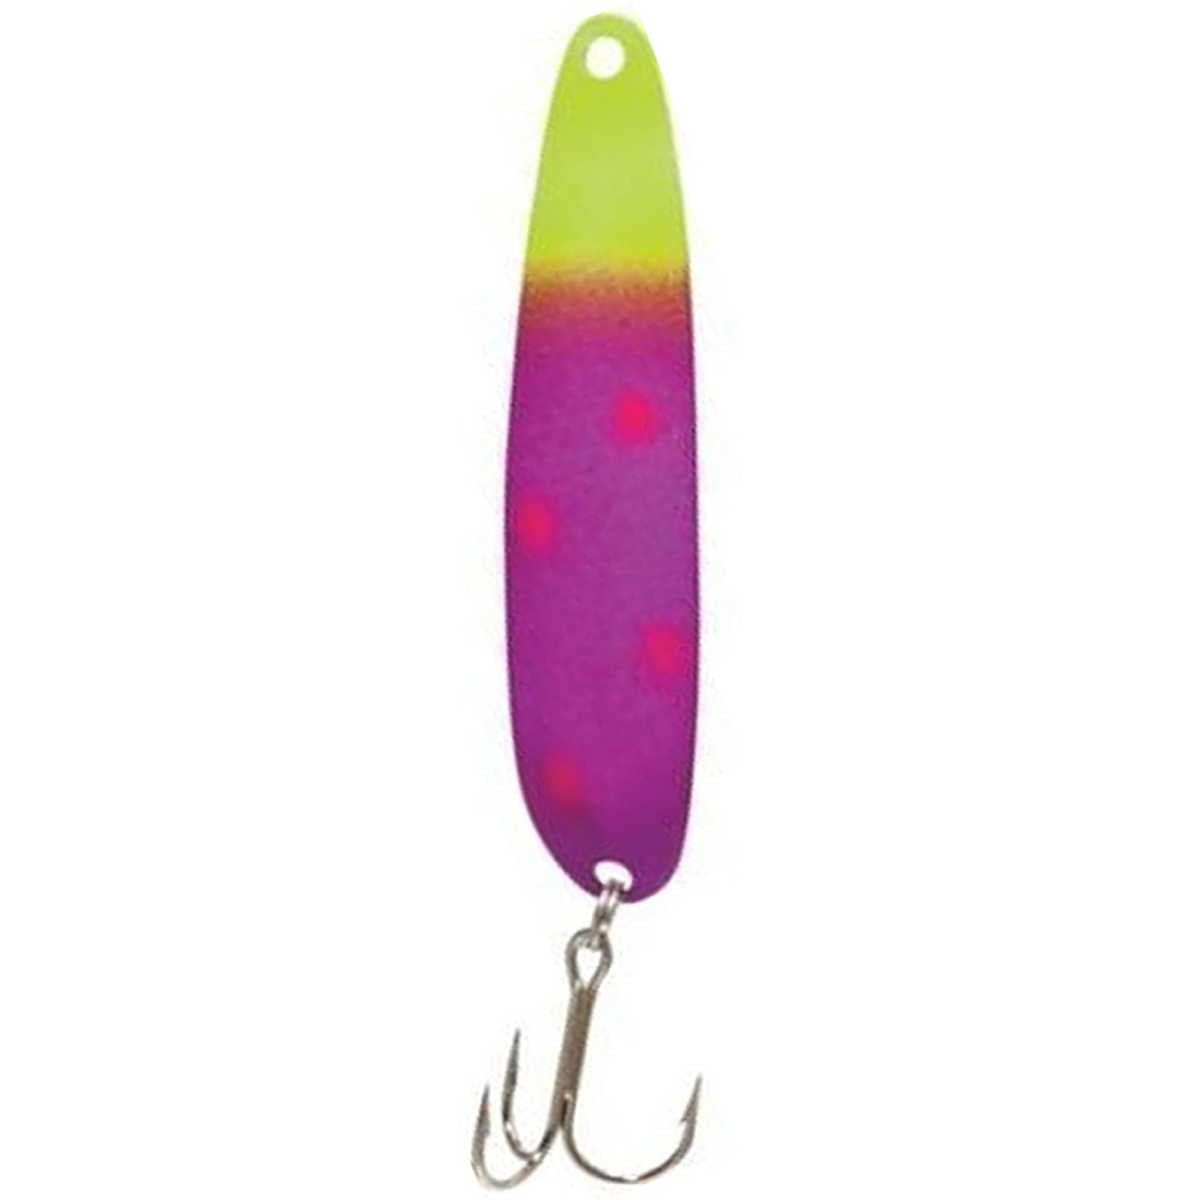 Photo of Advance Tackle Michigan Stinger Scorpion Spoon - Premium for sale at United Tackle Shops.